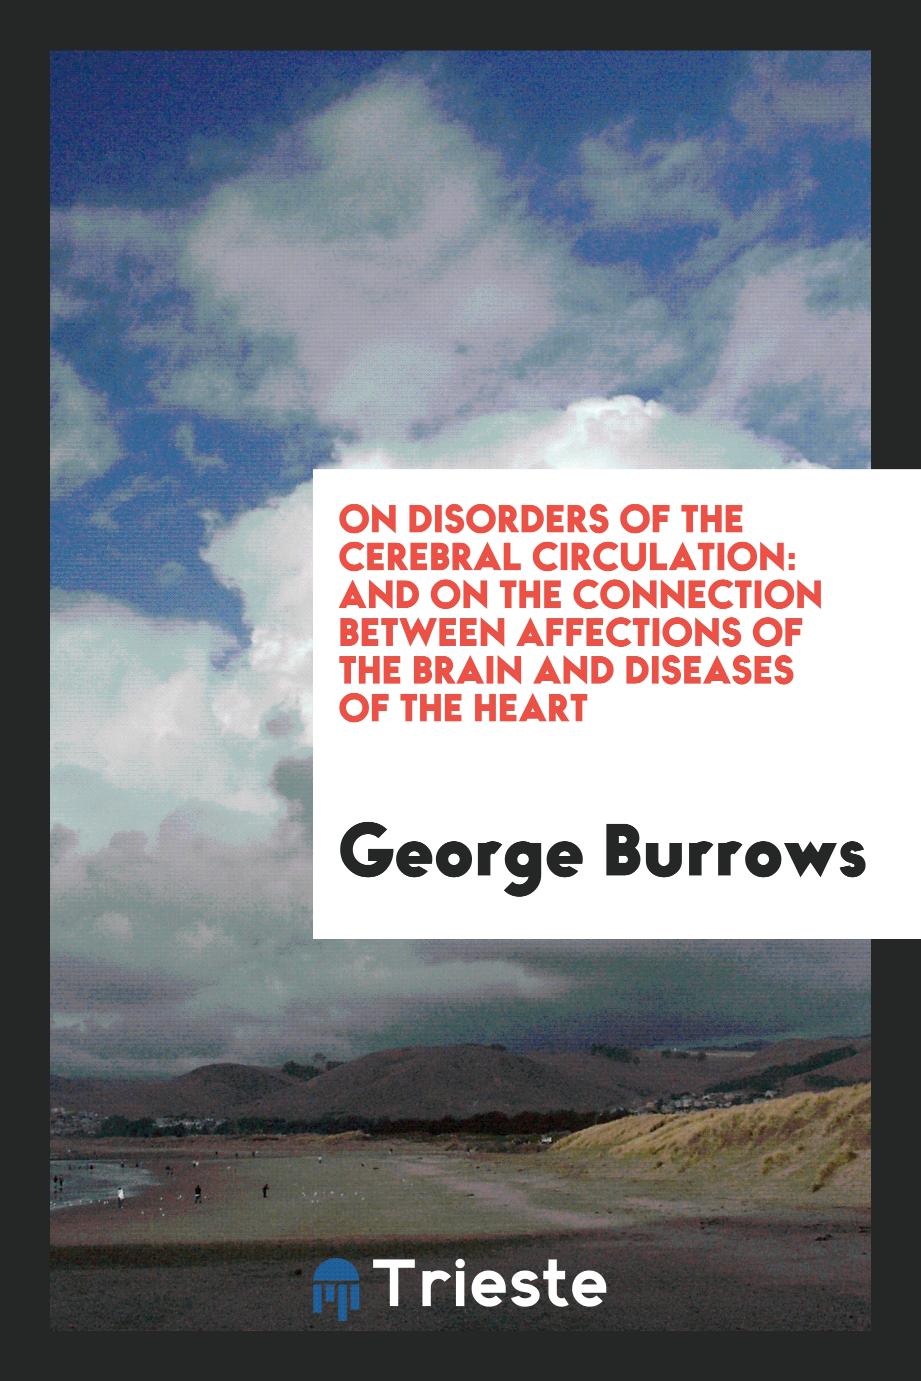 On disorders of the cerebral circulation: and on the connection between affections of the brain and diseases of the heart